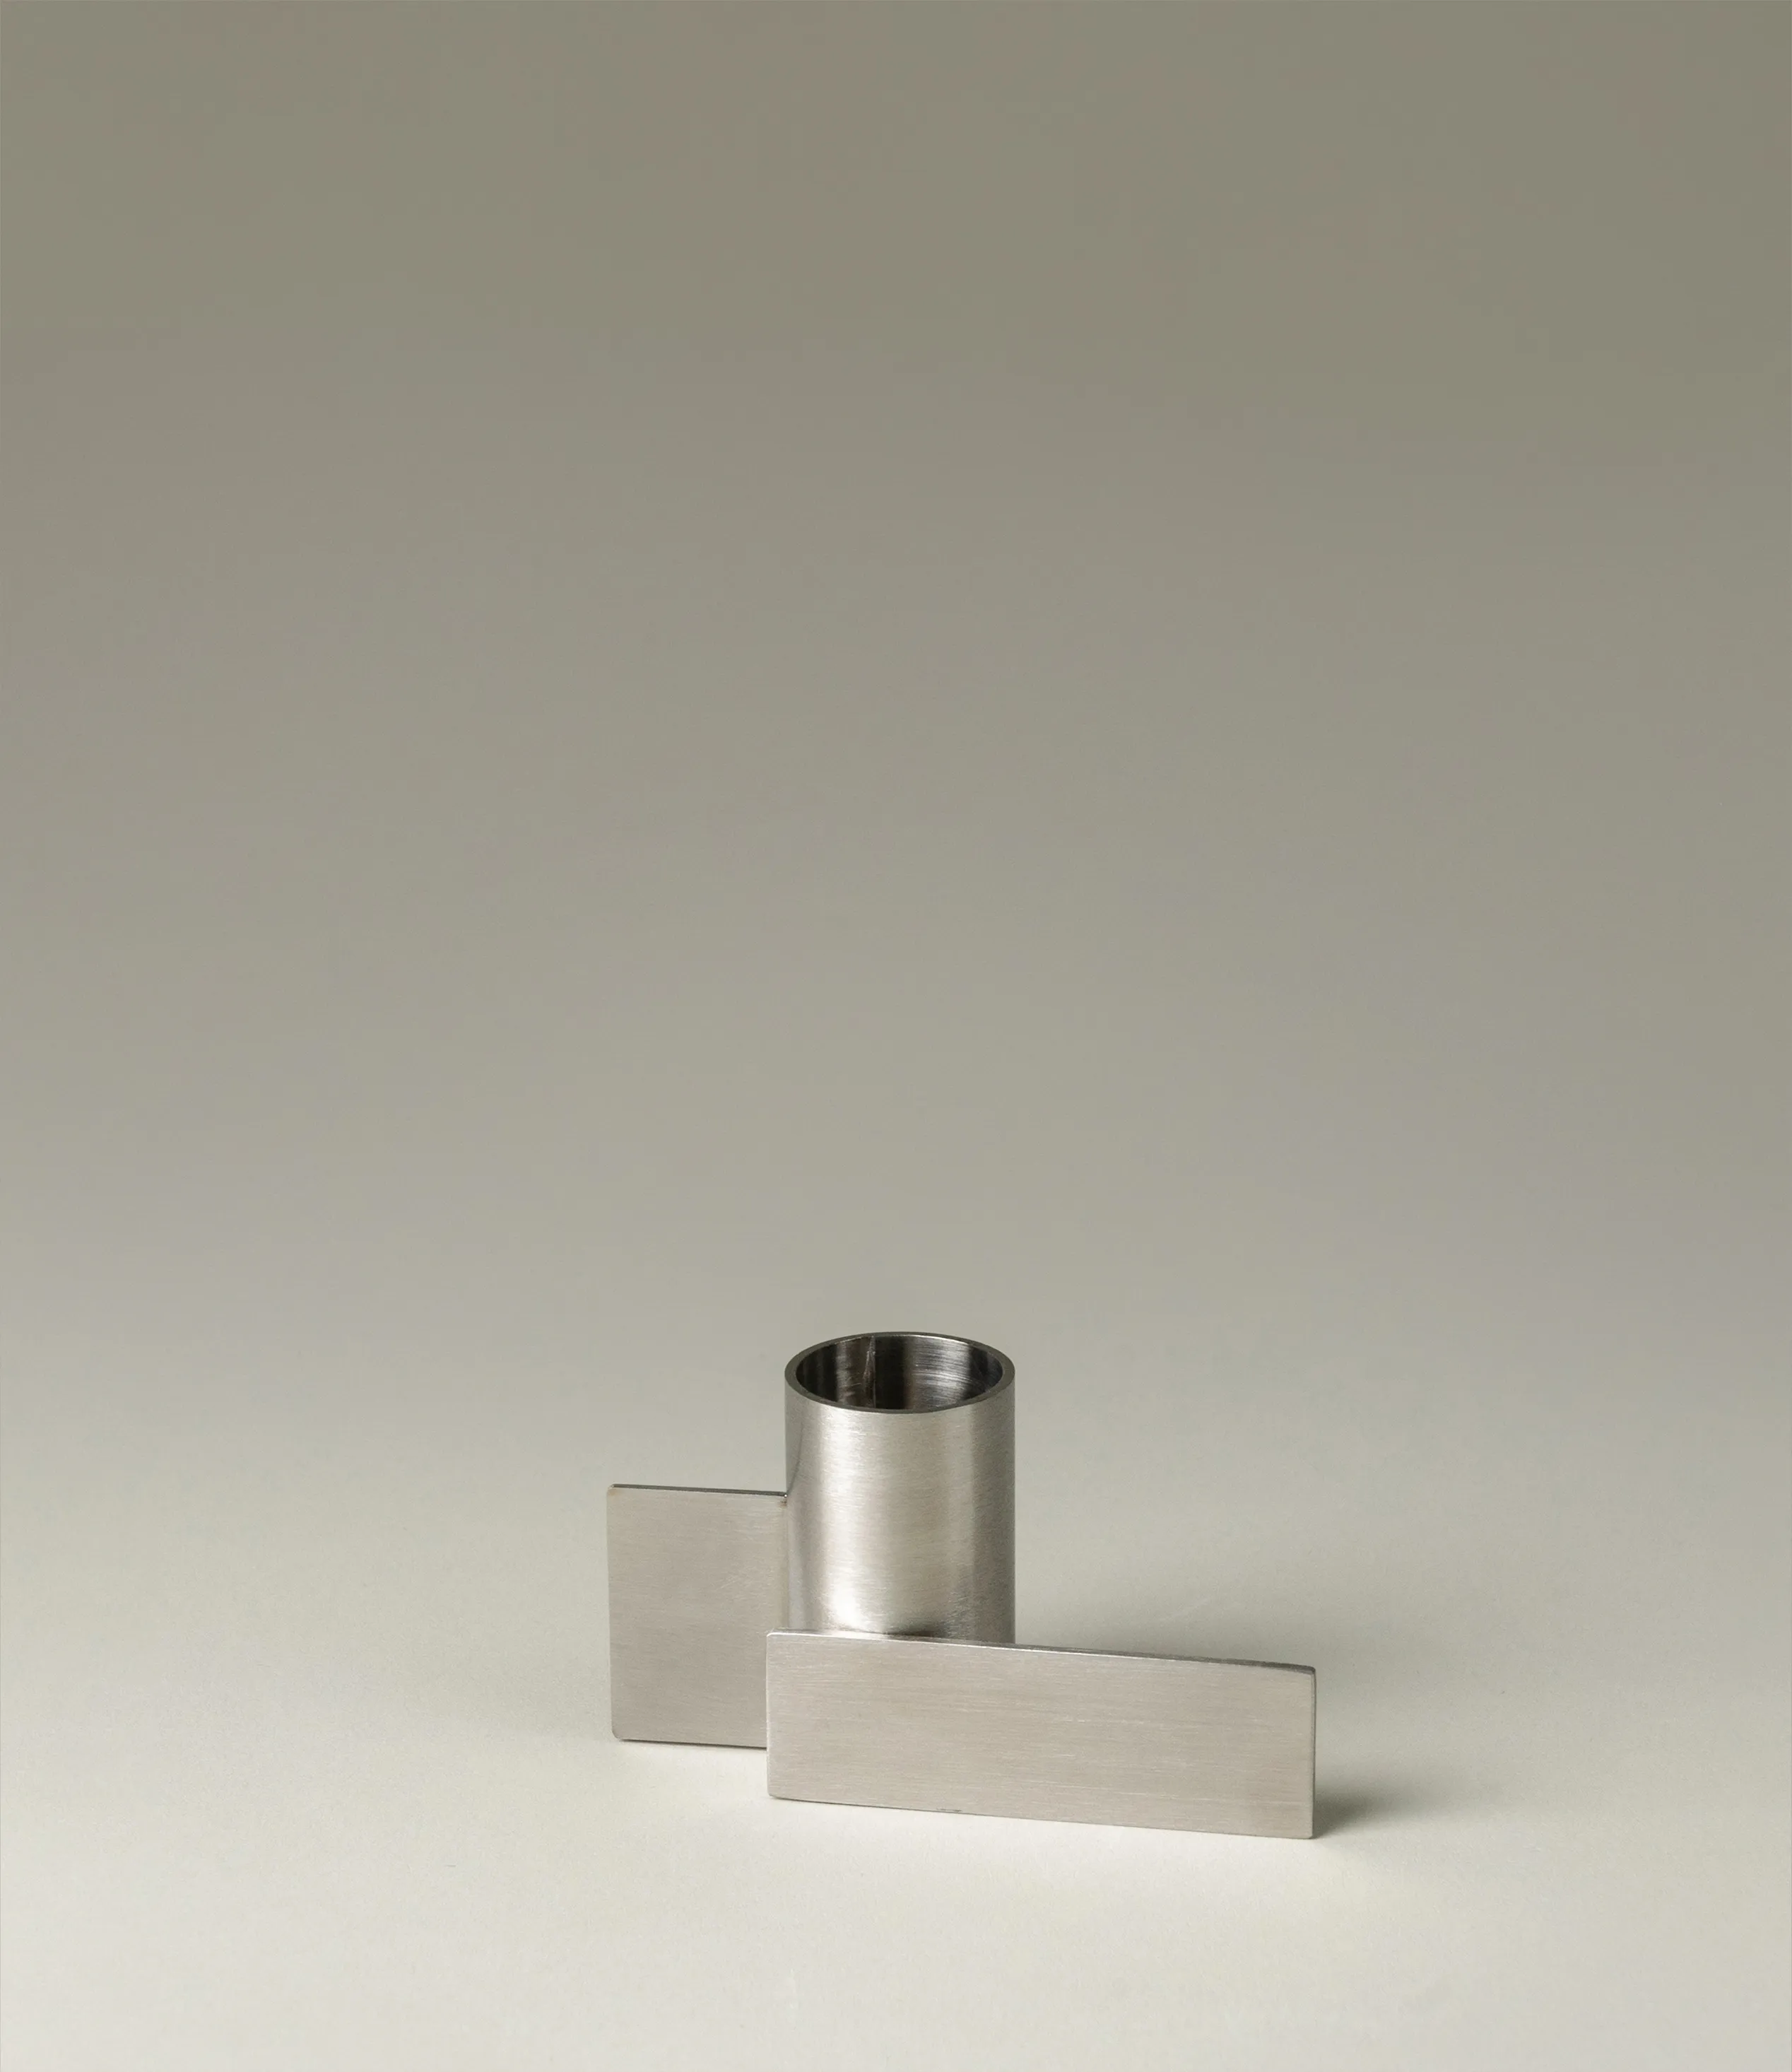 Icon Iysestage 01 from Stences is a candleholder made for taper candles. This picture shows the chrome variant of this item. The steel material has a glossy surface which emphasize the soft geometric shapes of the product in question.